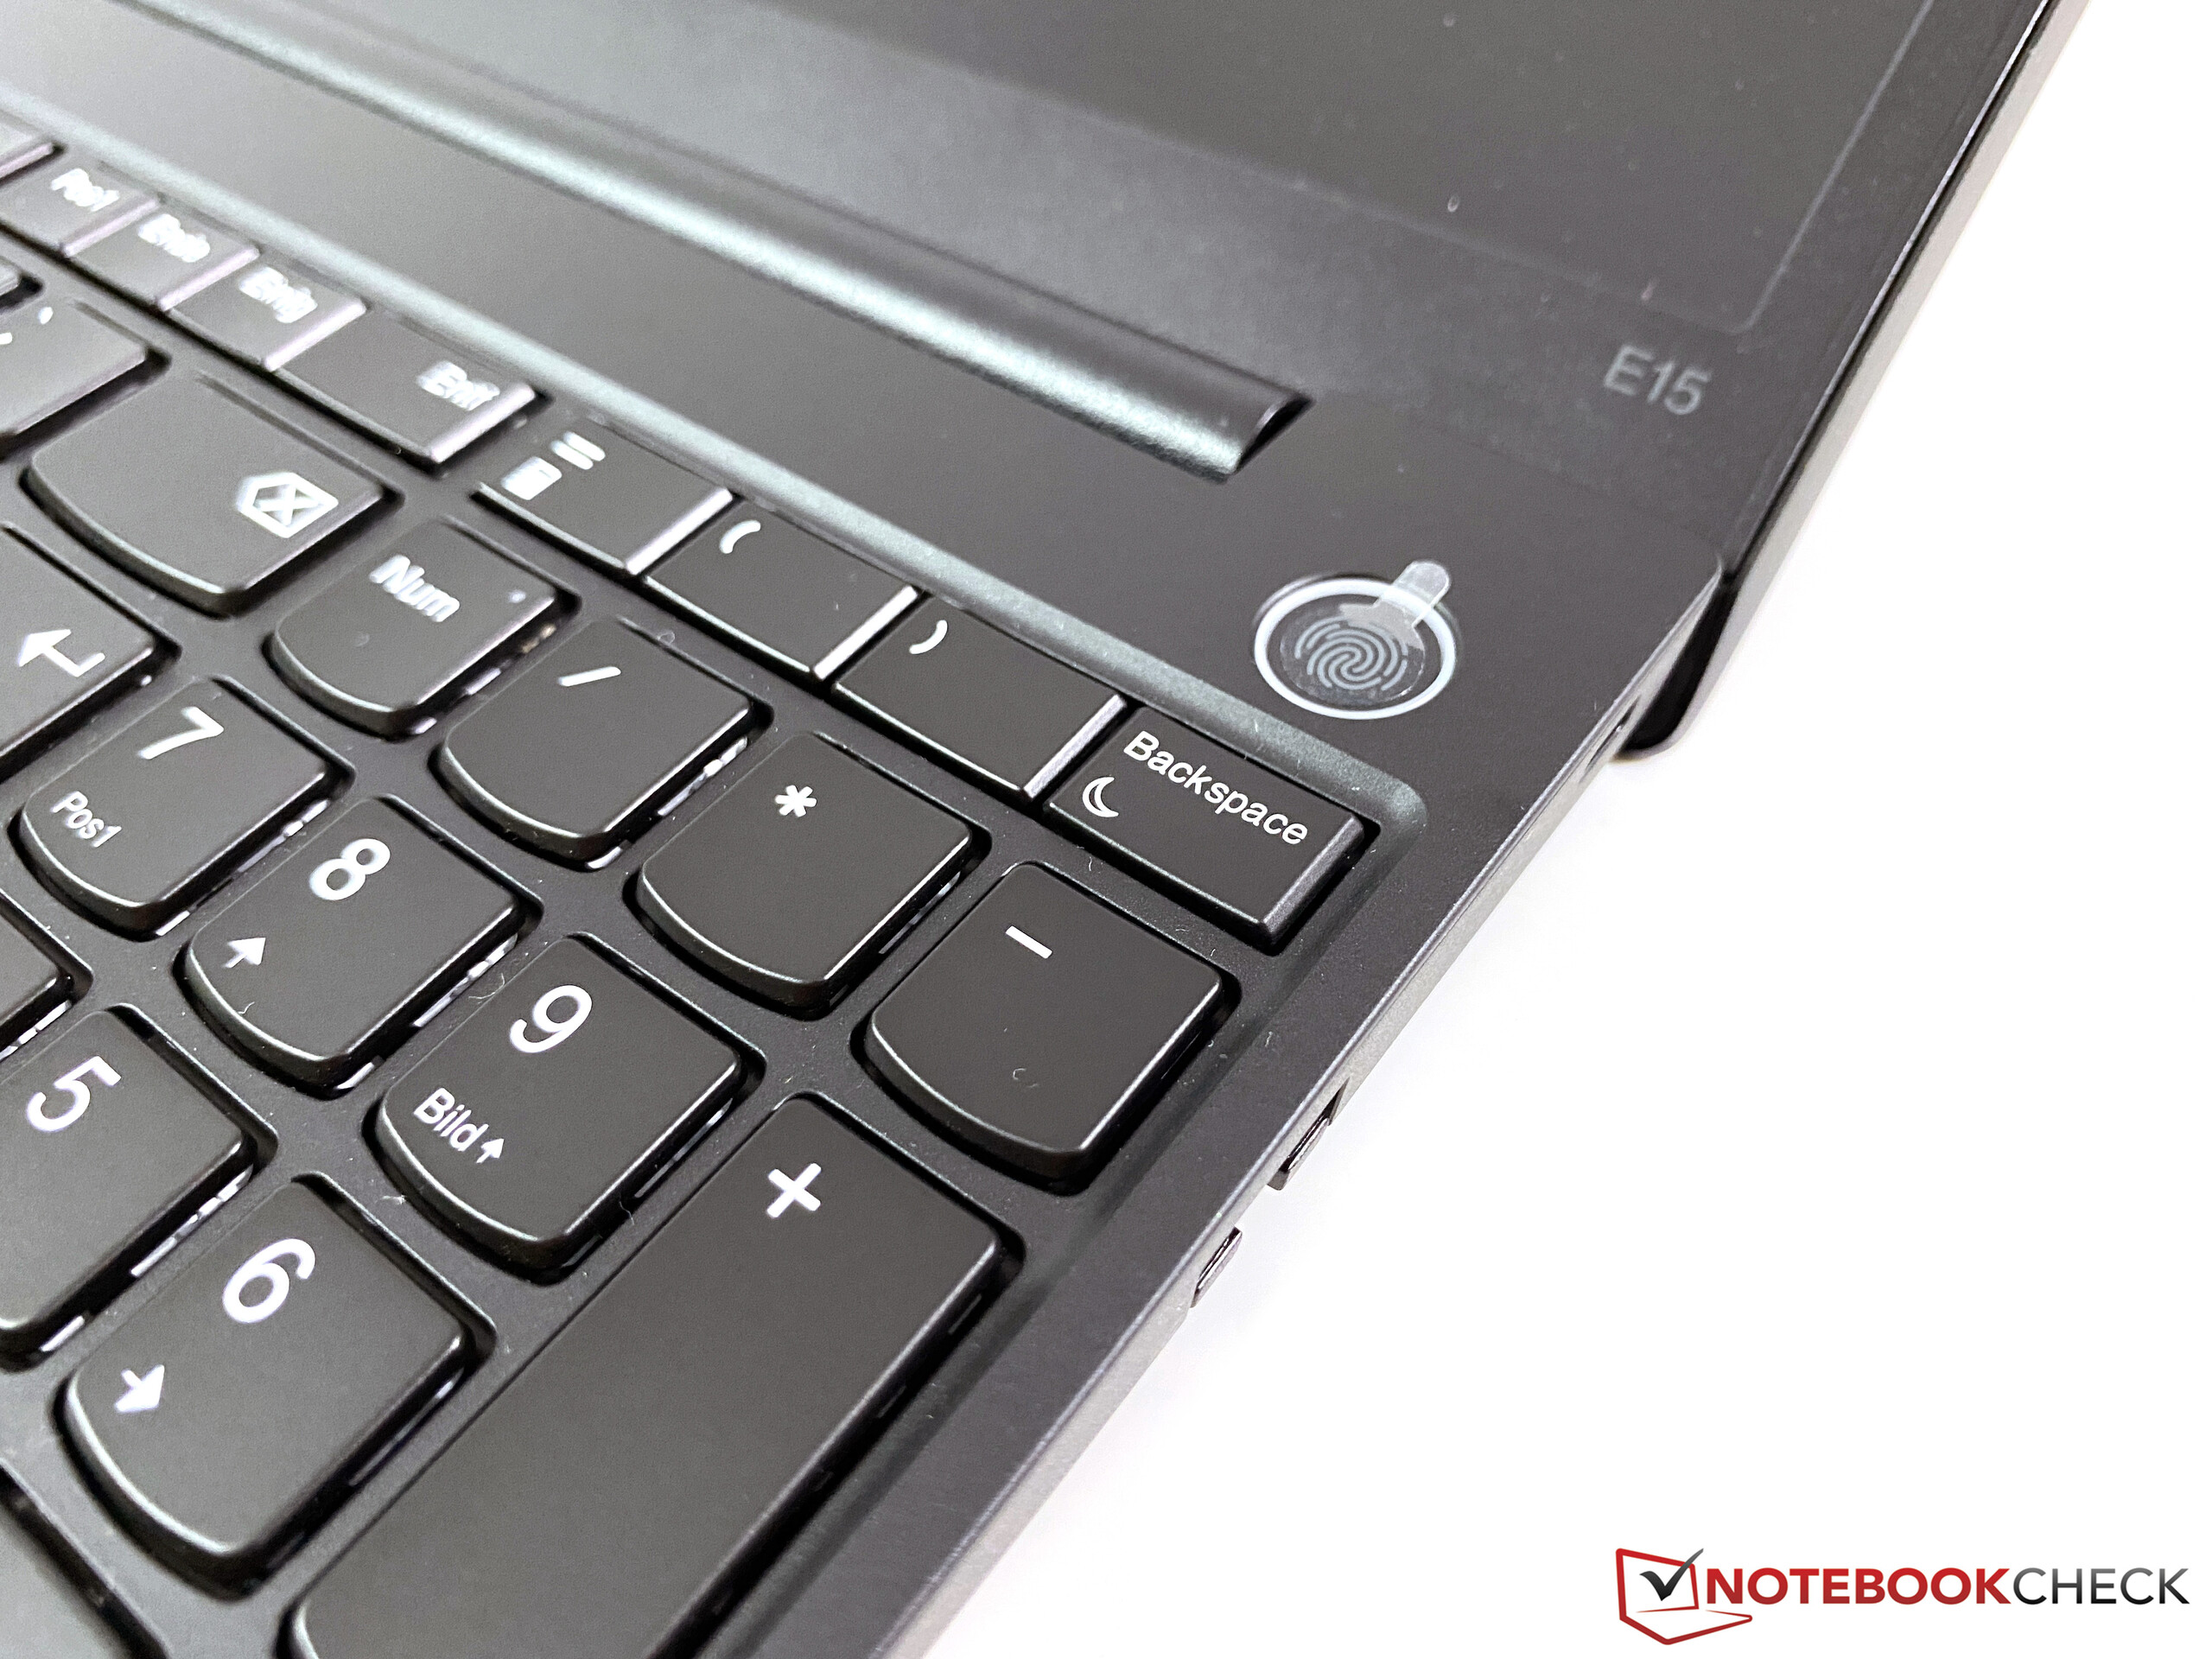 Lenovo ThinkPad E15  Review: Office laptop with an AMD chip and new  design  Reviews